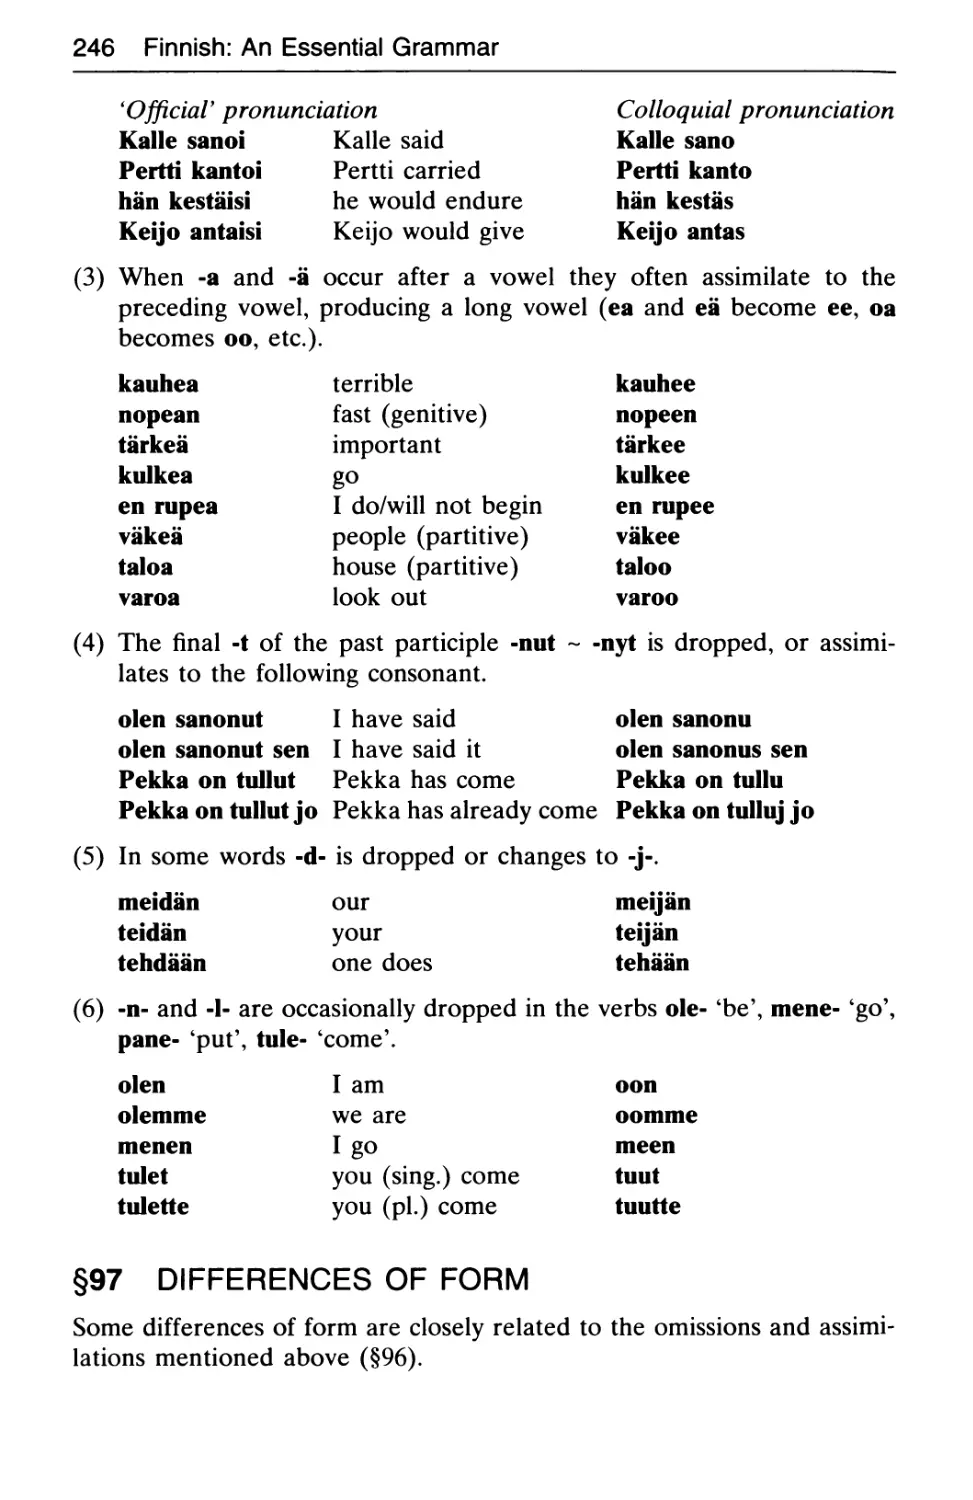 §97 Differences of form